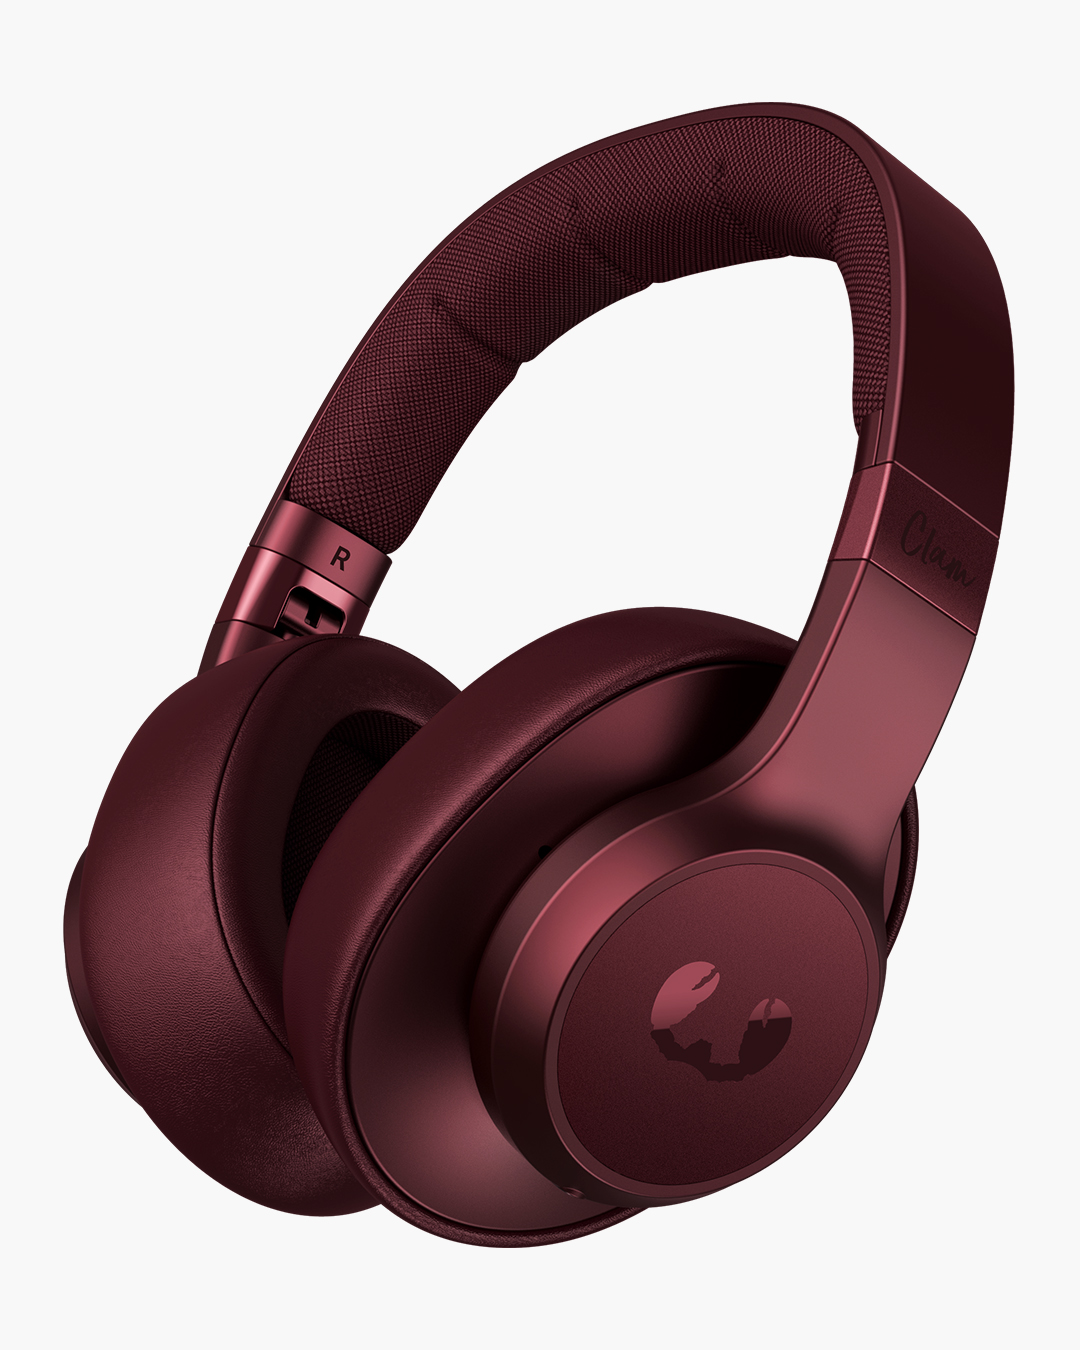 Fresh 'n Rebel - Clam ANC - Wireless over-ear headphones with active noise cancelling - Ruby Red